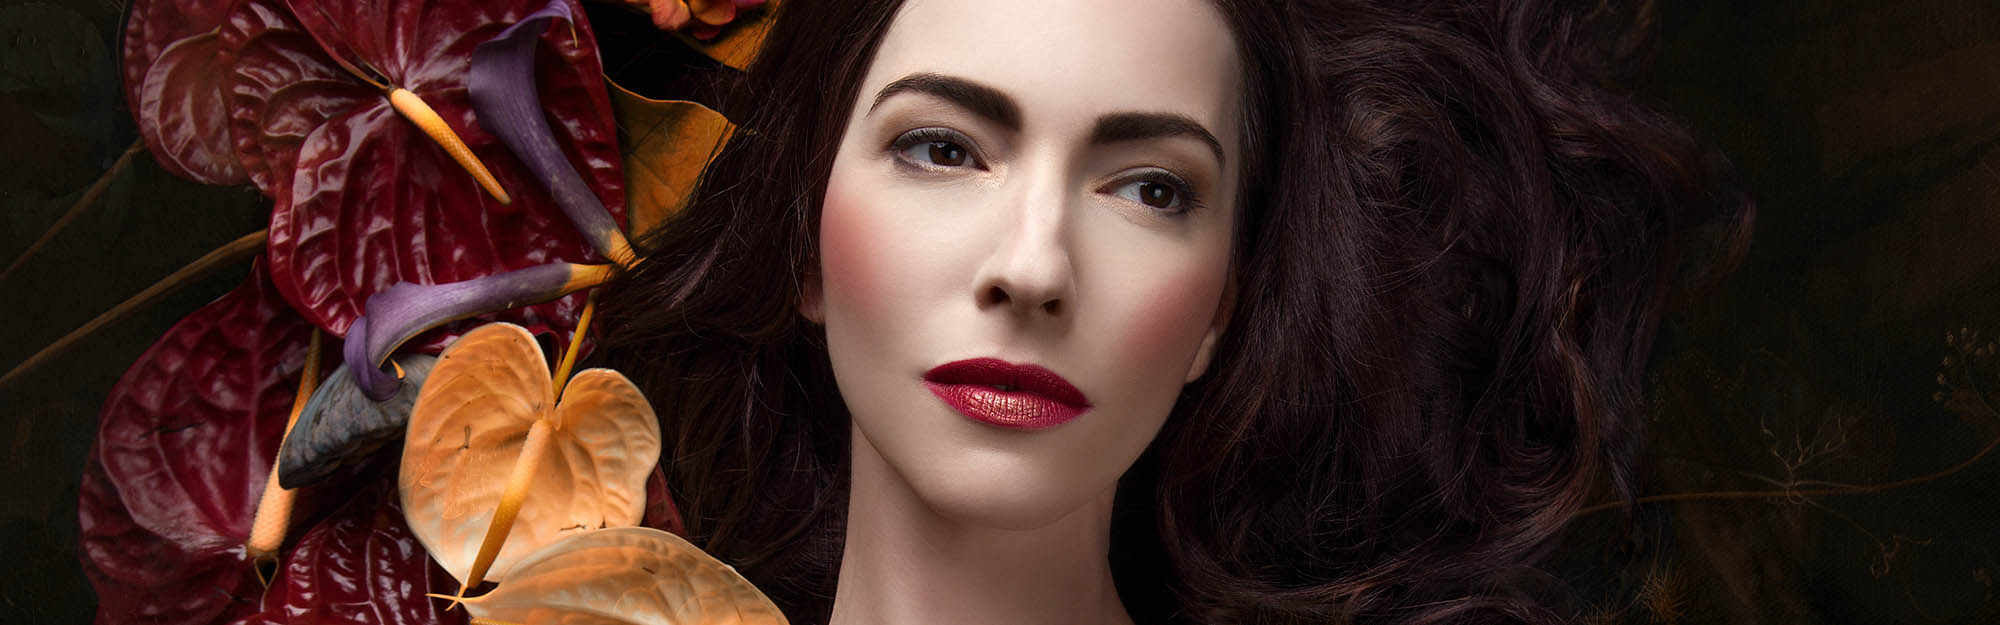 Chrysta Bell by Sylwia Makris_PROMO_PIC